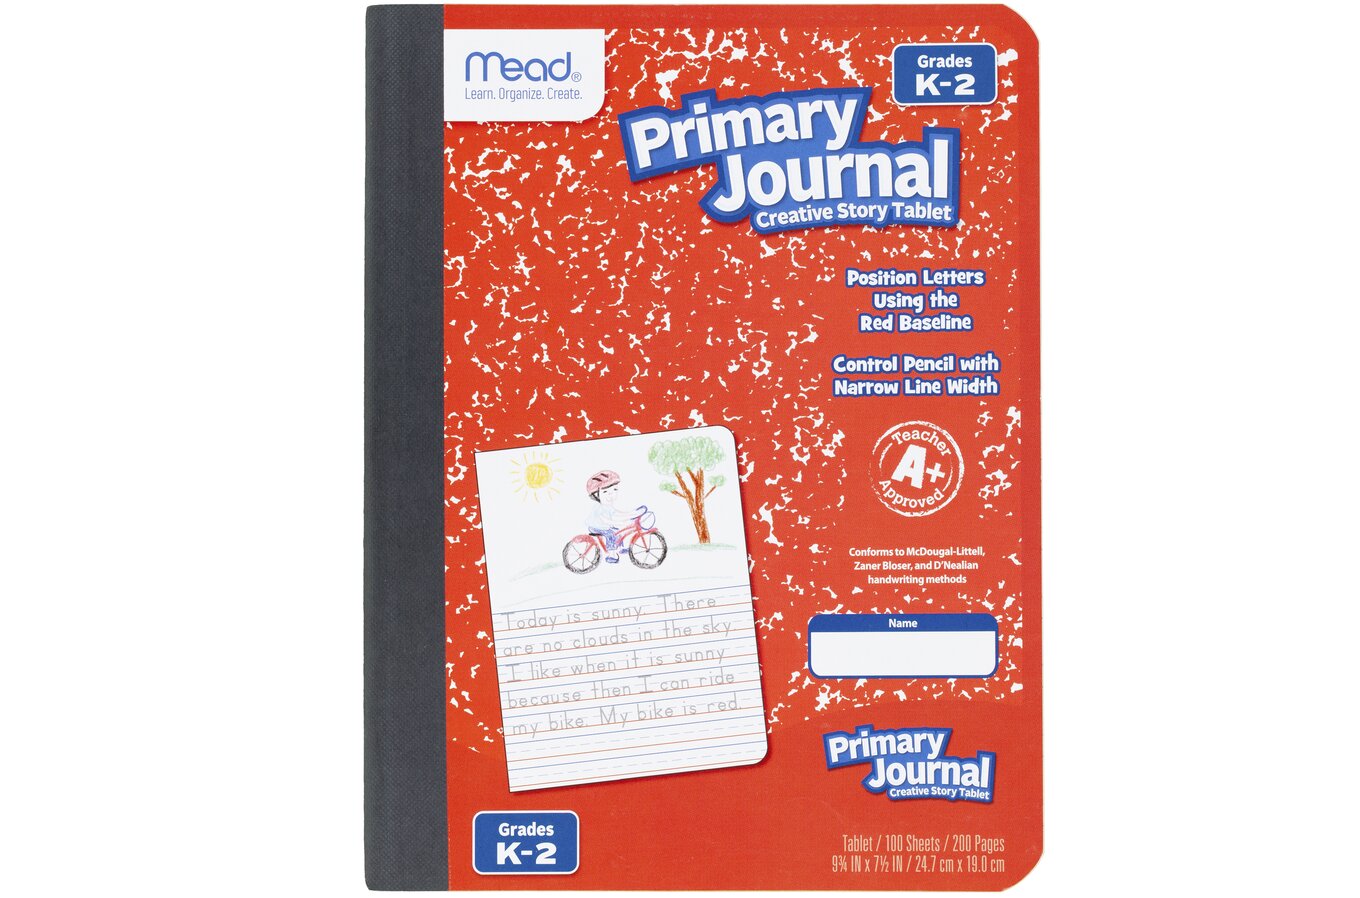 Mead® K-2 Classroom Primary Journal, 7-1/2 x 9-4/5, 100 Sheets, Assorted